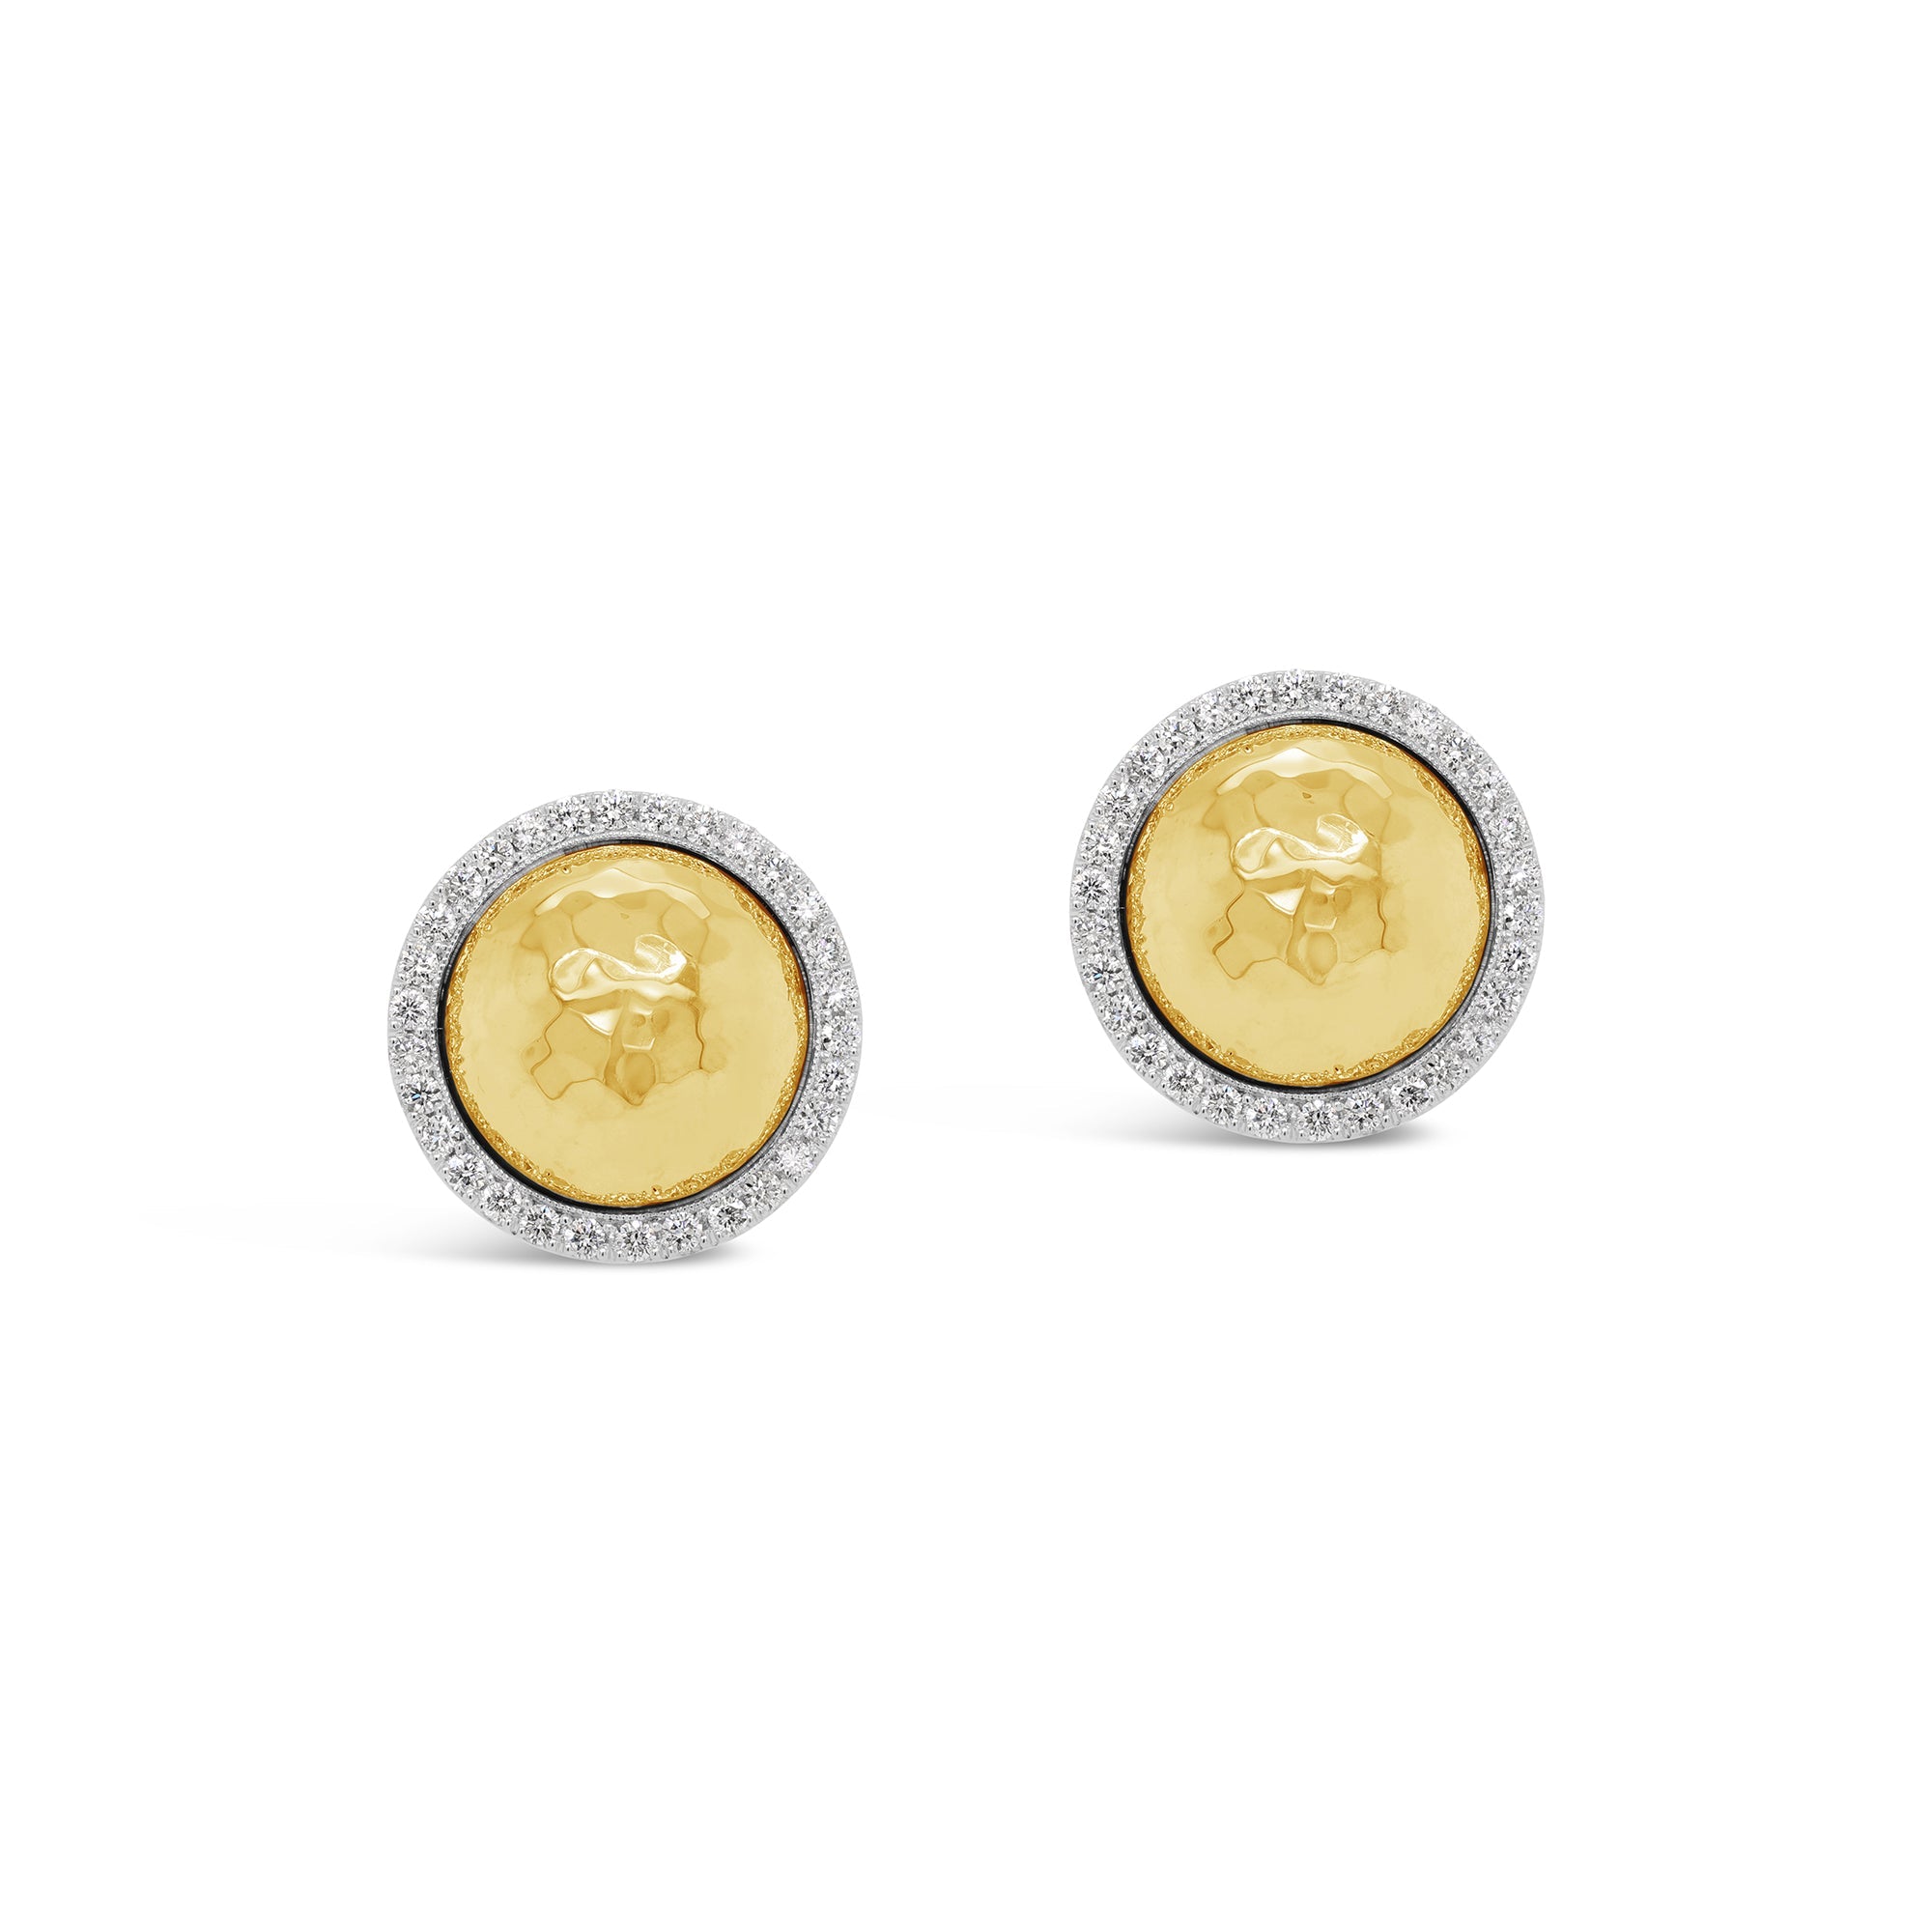 Yellow Gold Hammered Dome & Diamond Earrings